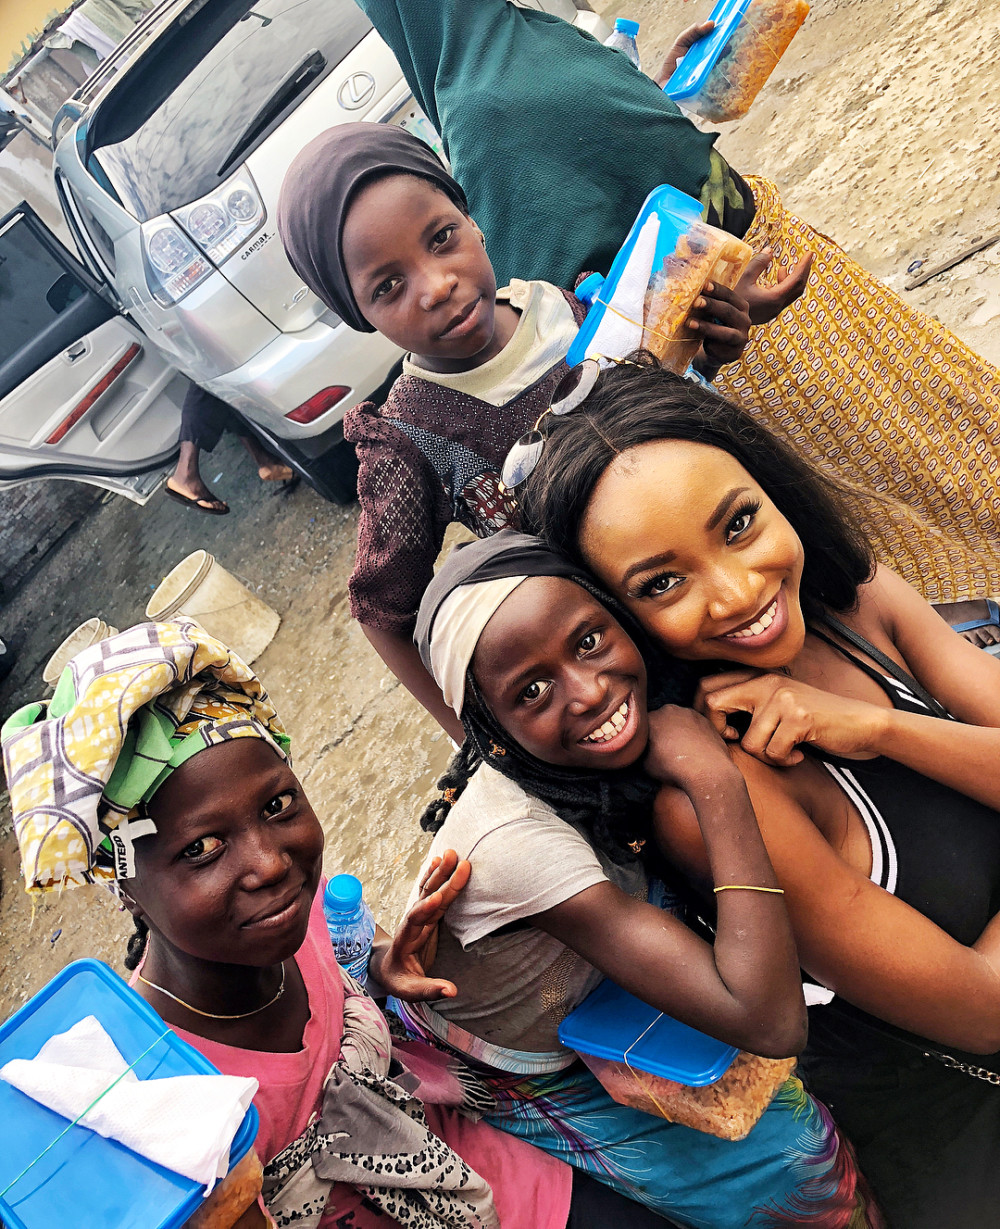 Ini Dima-Okojie spent her day with less privileged Kids 💕